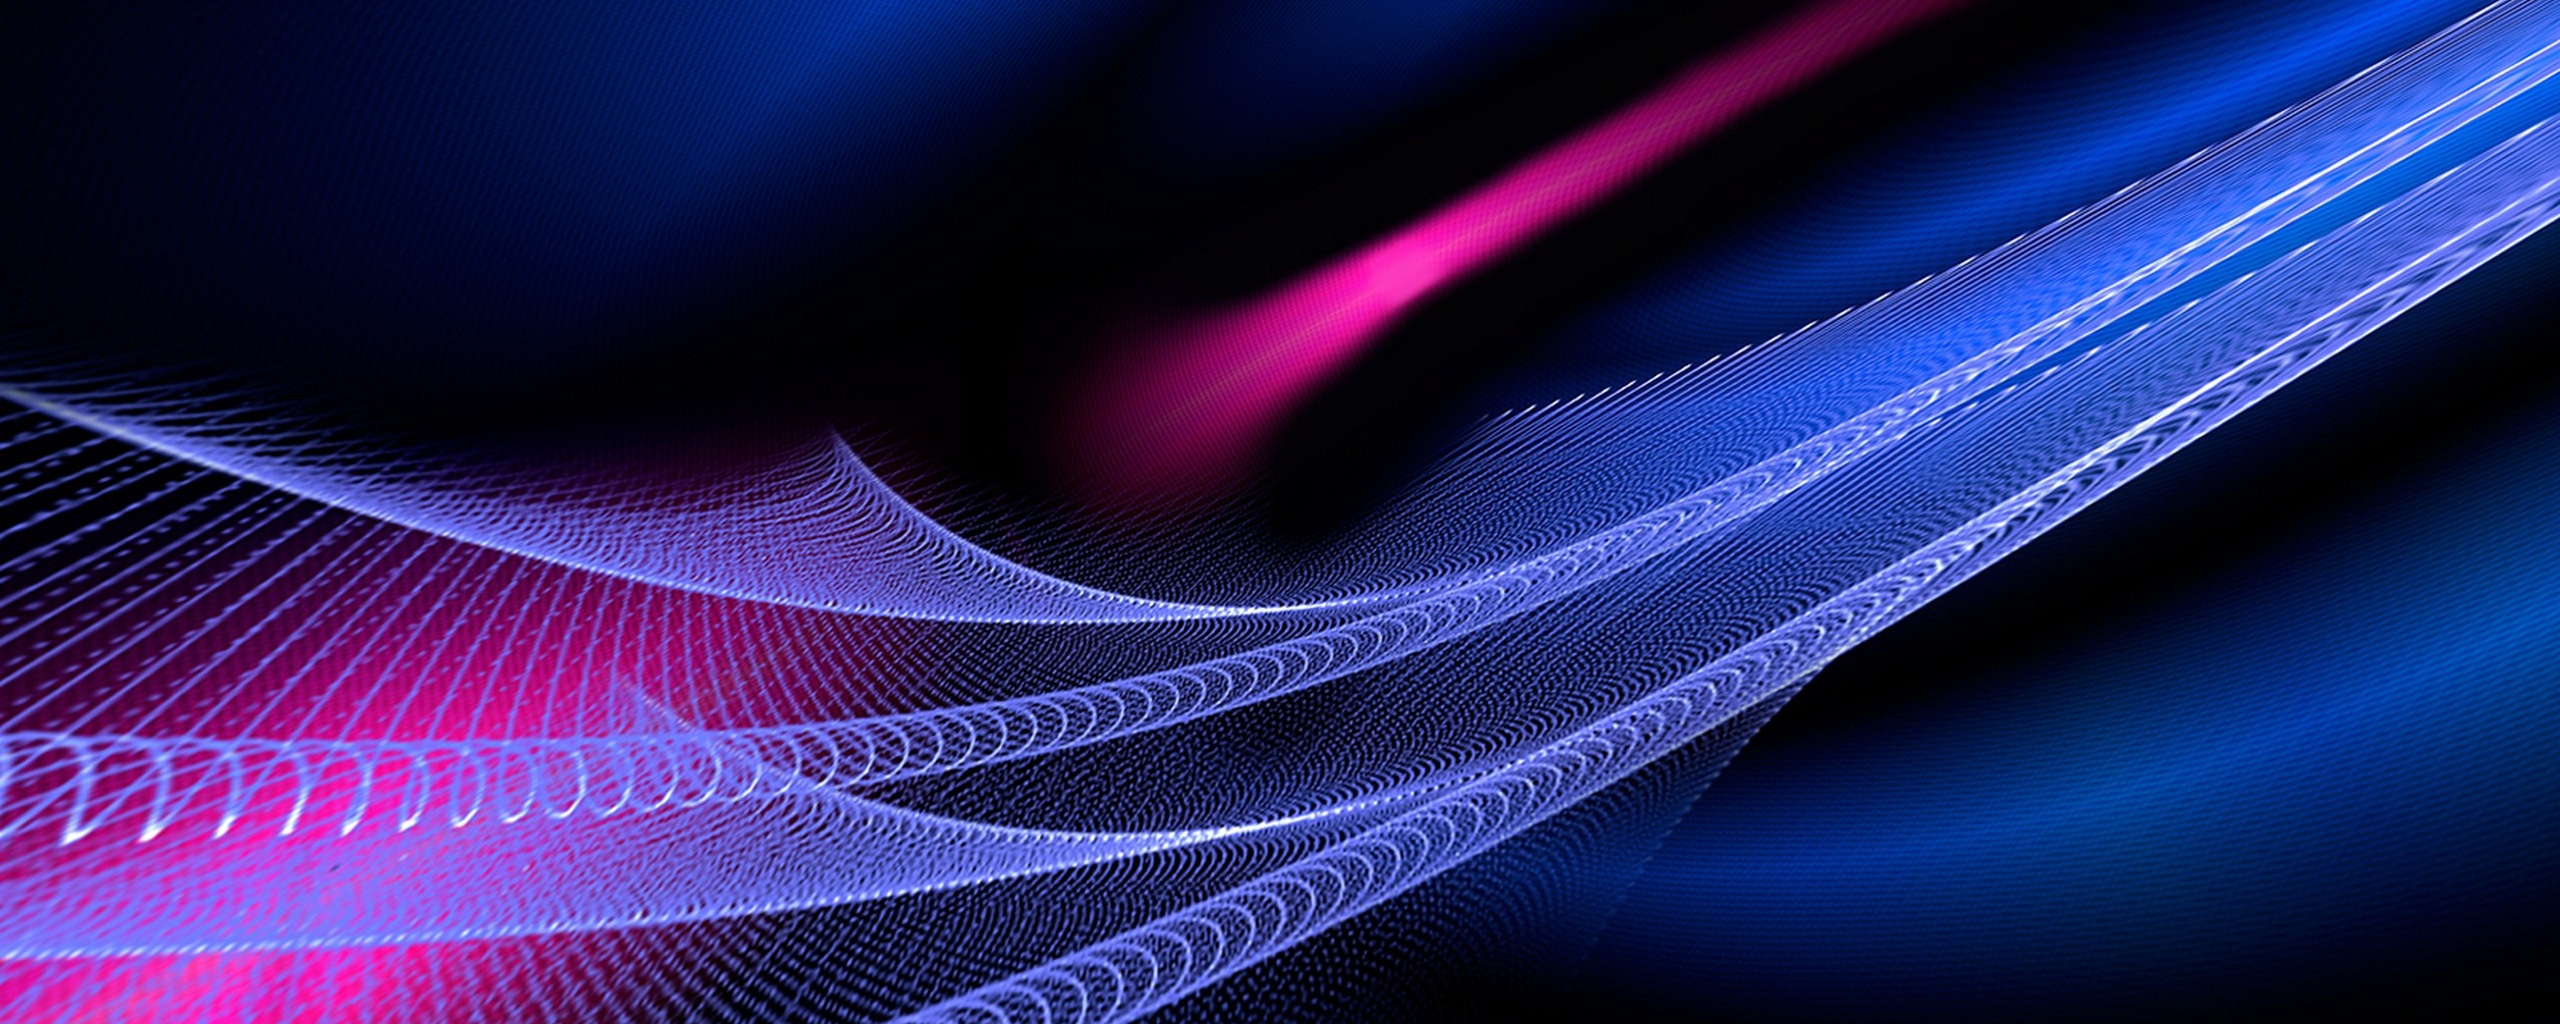 Wallpaper 2560x1024 mesh abstract background color Dual Monitor